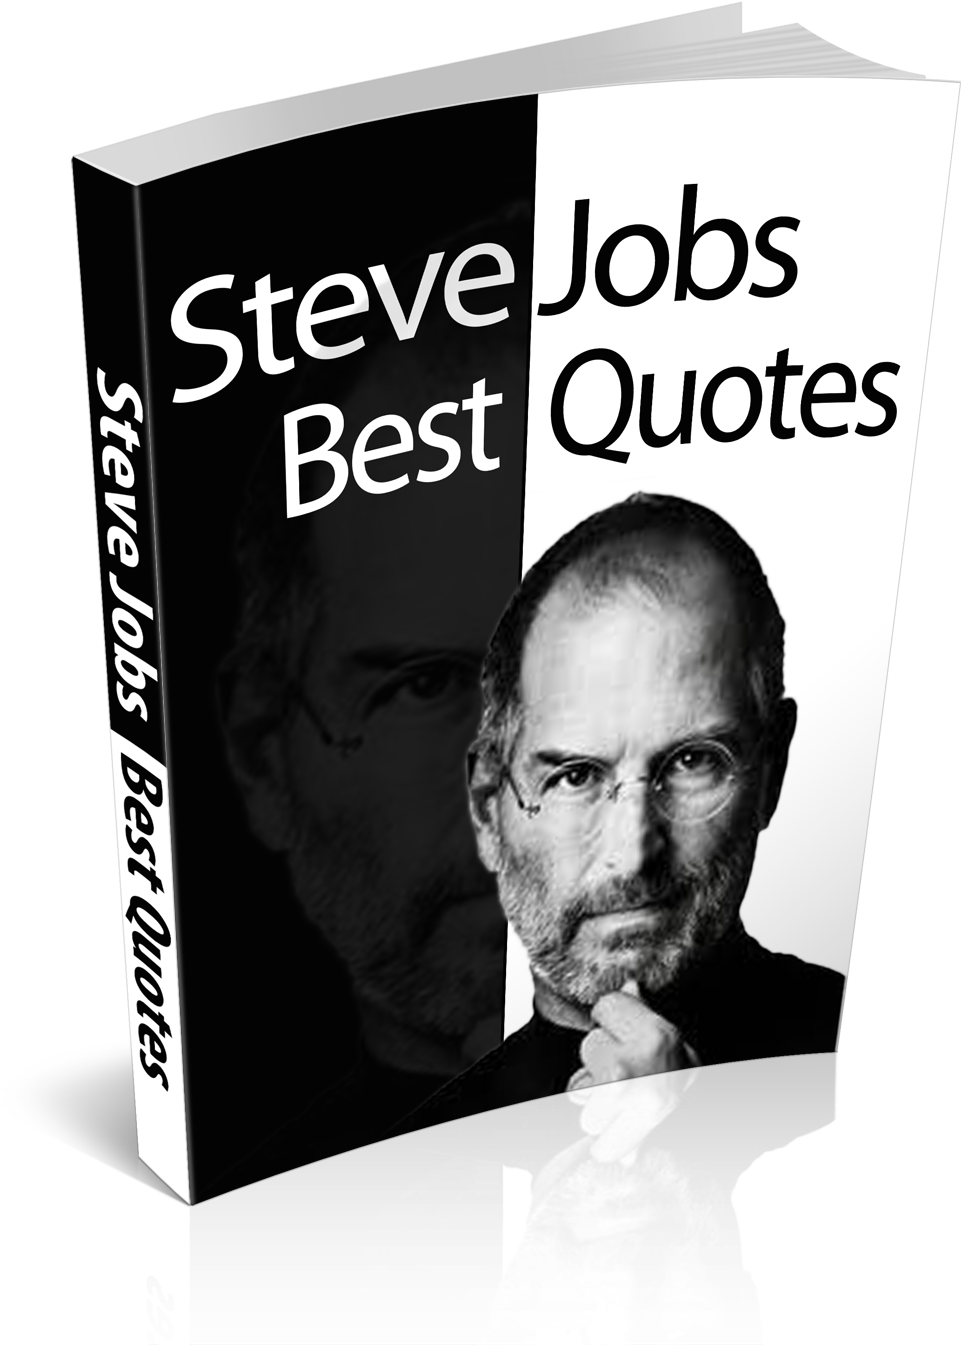 Steve Jobs Quotes Book Cover PNG image